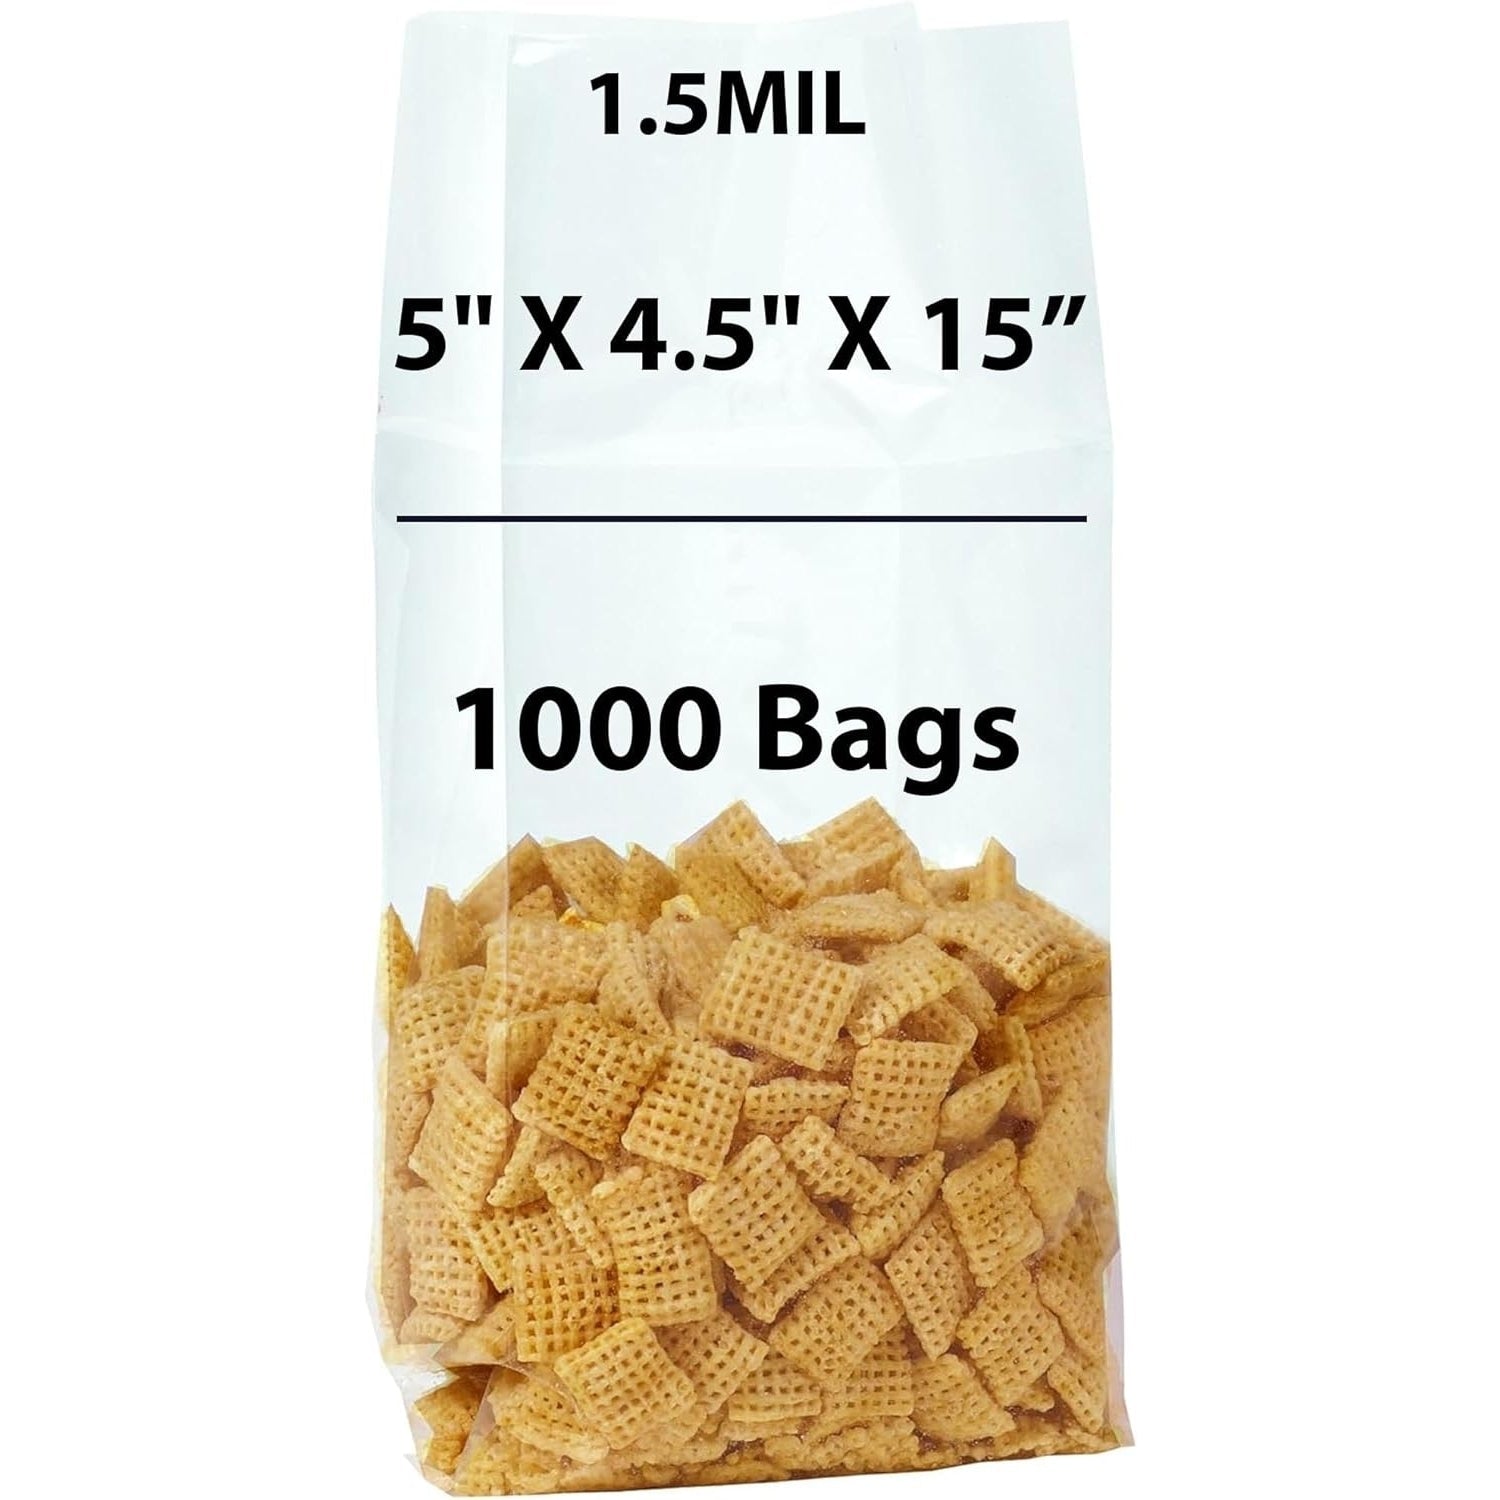 Gusseted Polypropylene Bags 1.5 Mil 5 inch X 4.5 inch X 15 inch Size 1000 bags